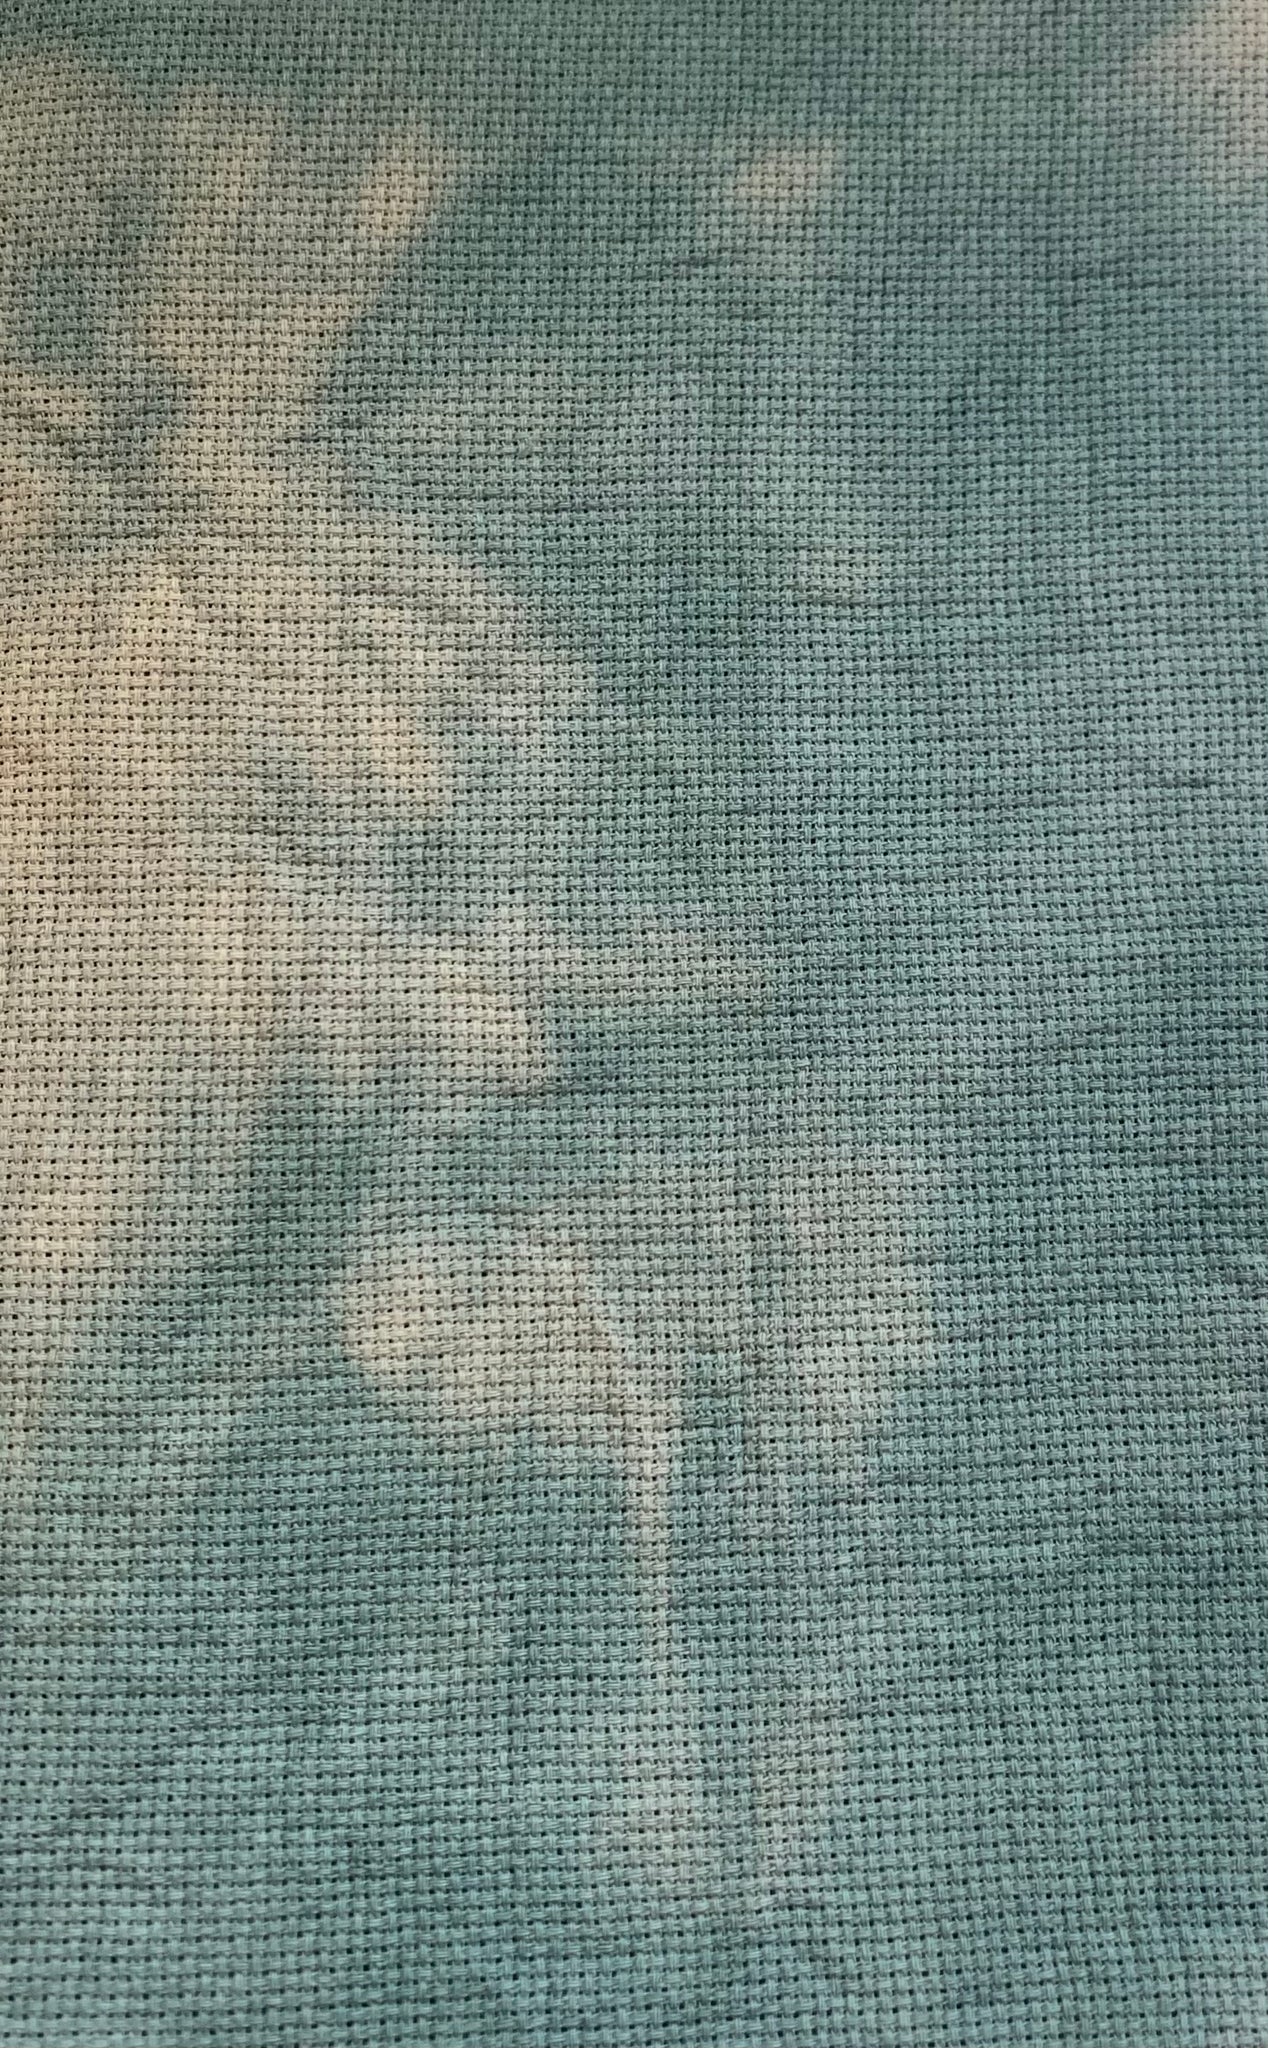 20ct Aida By Jodi SCS - Moldy cheese